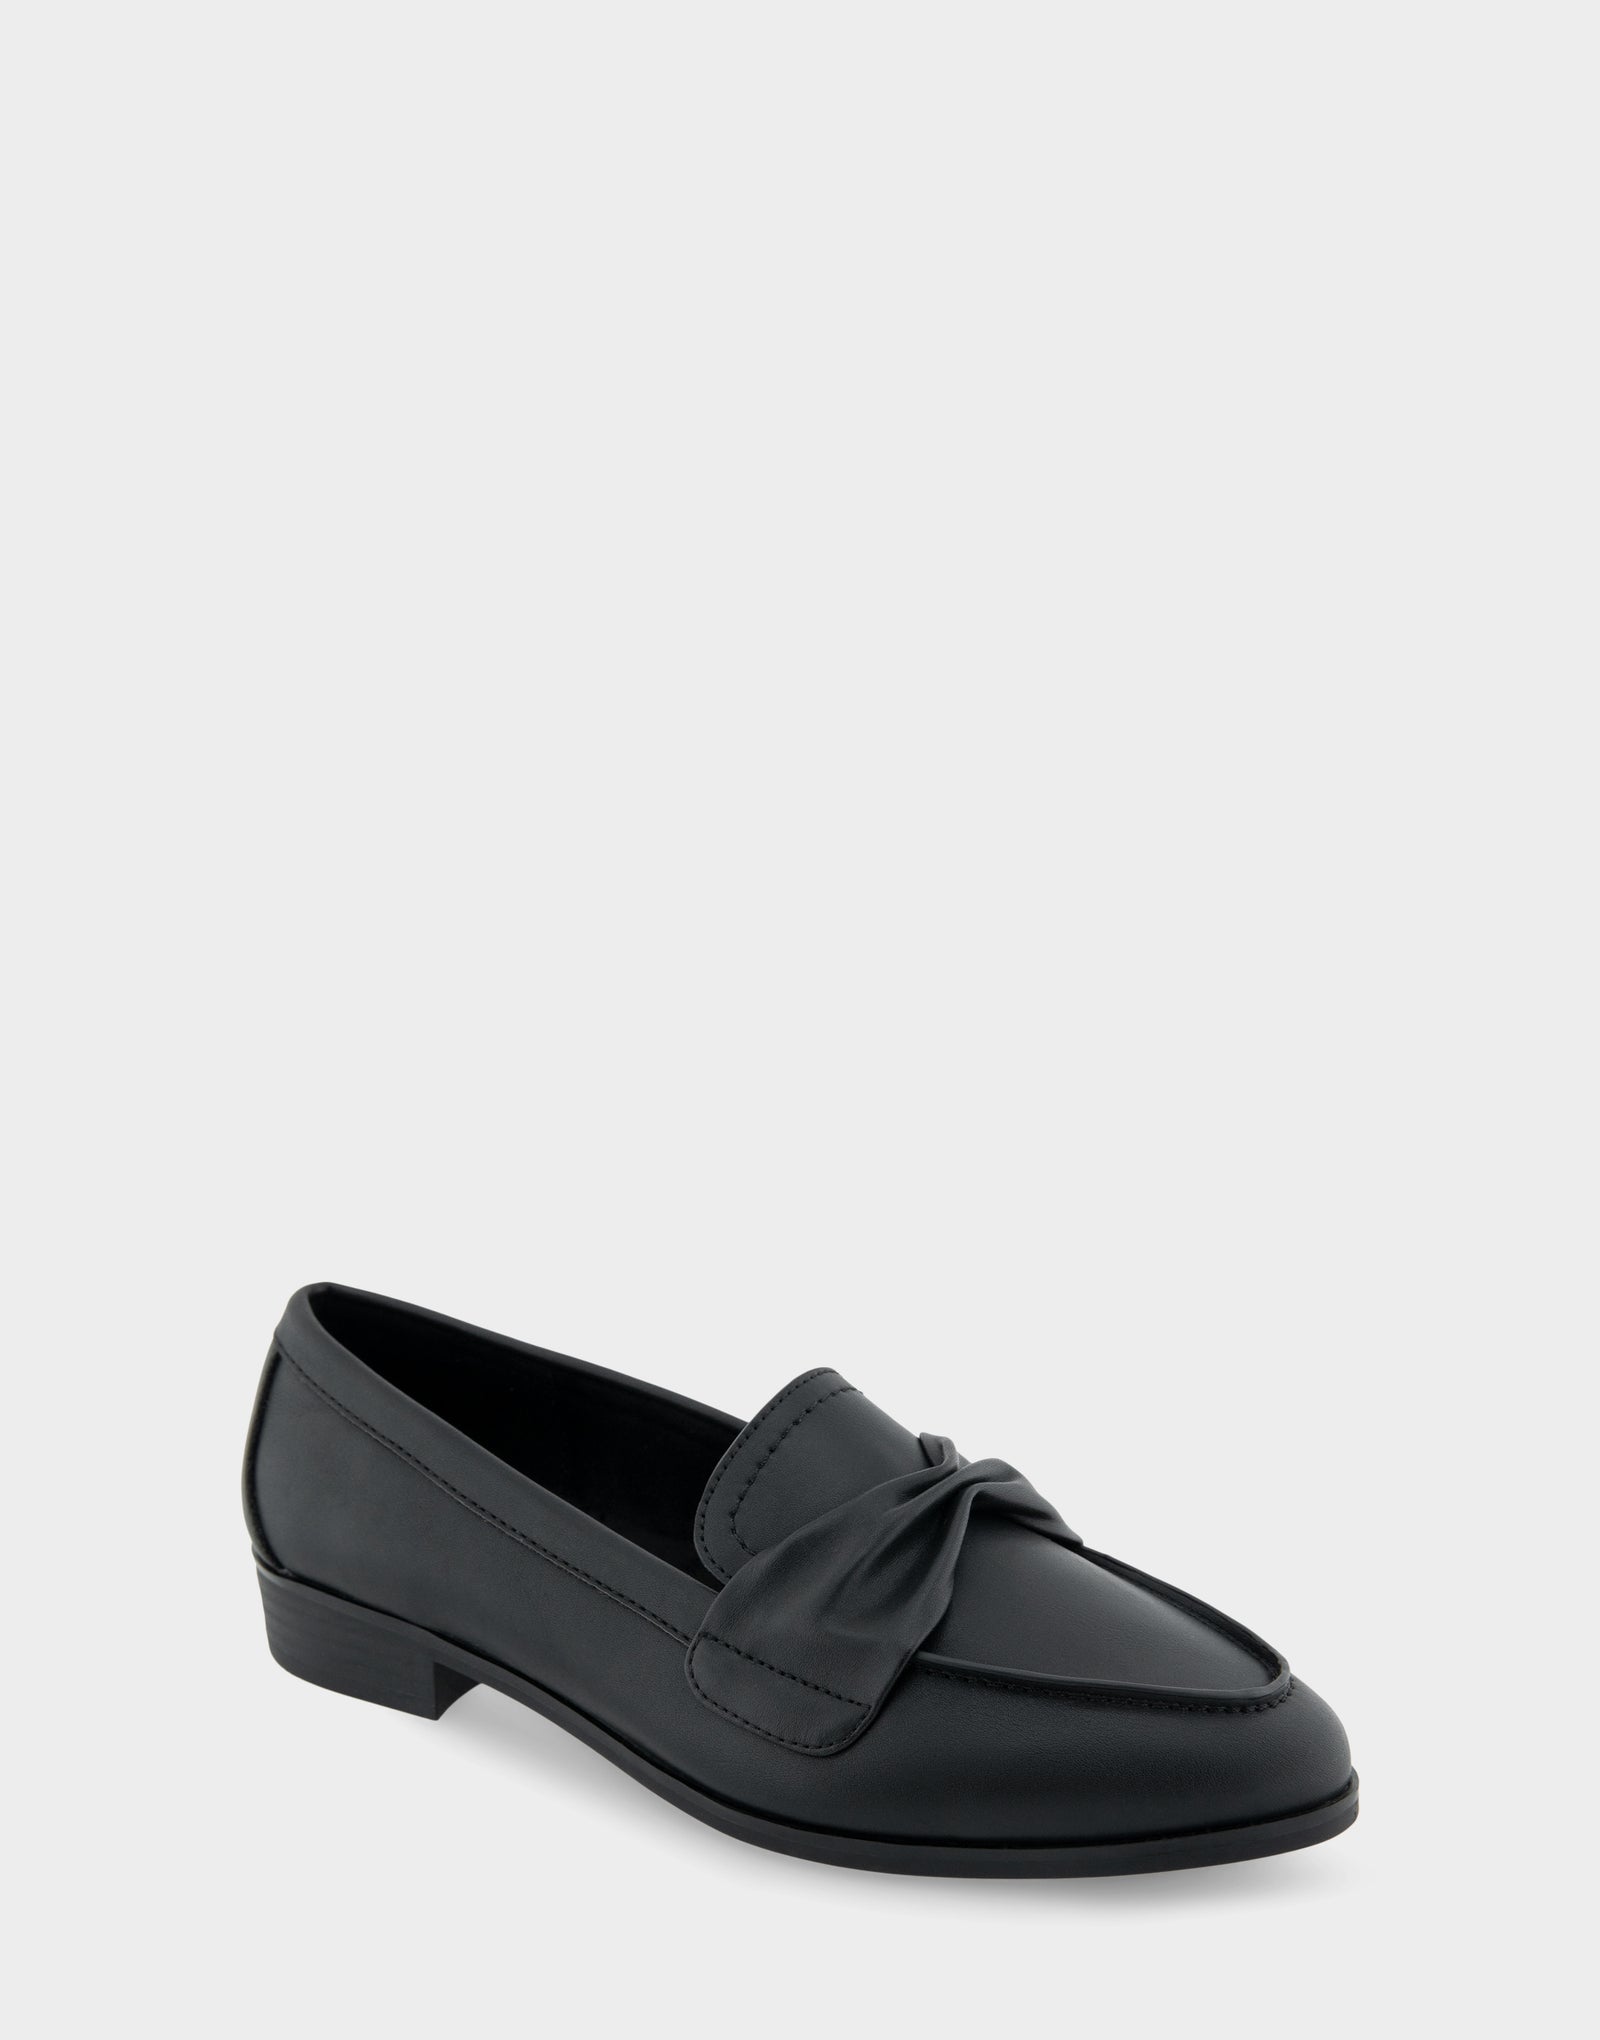 Women's Tailored Loafer in Black Faux Leather